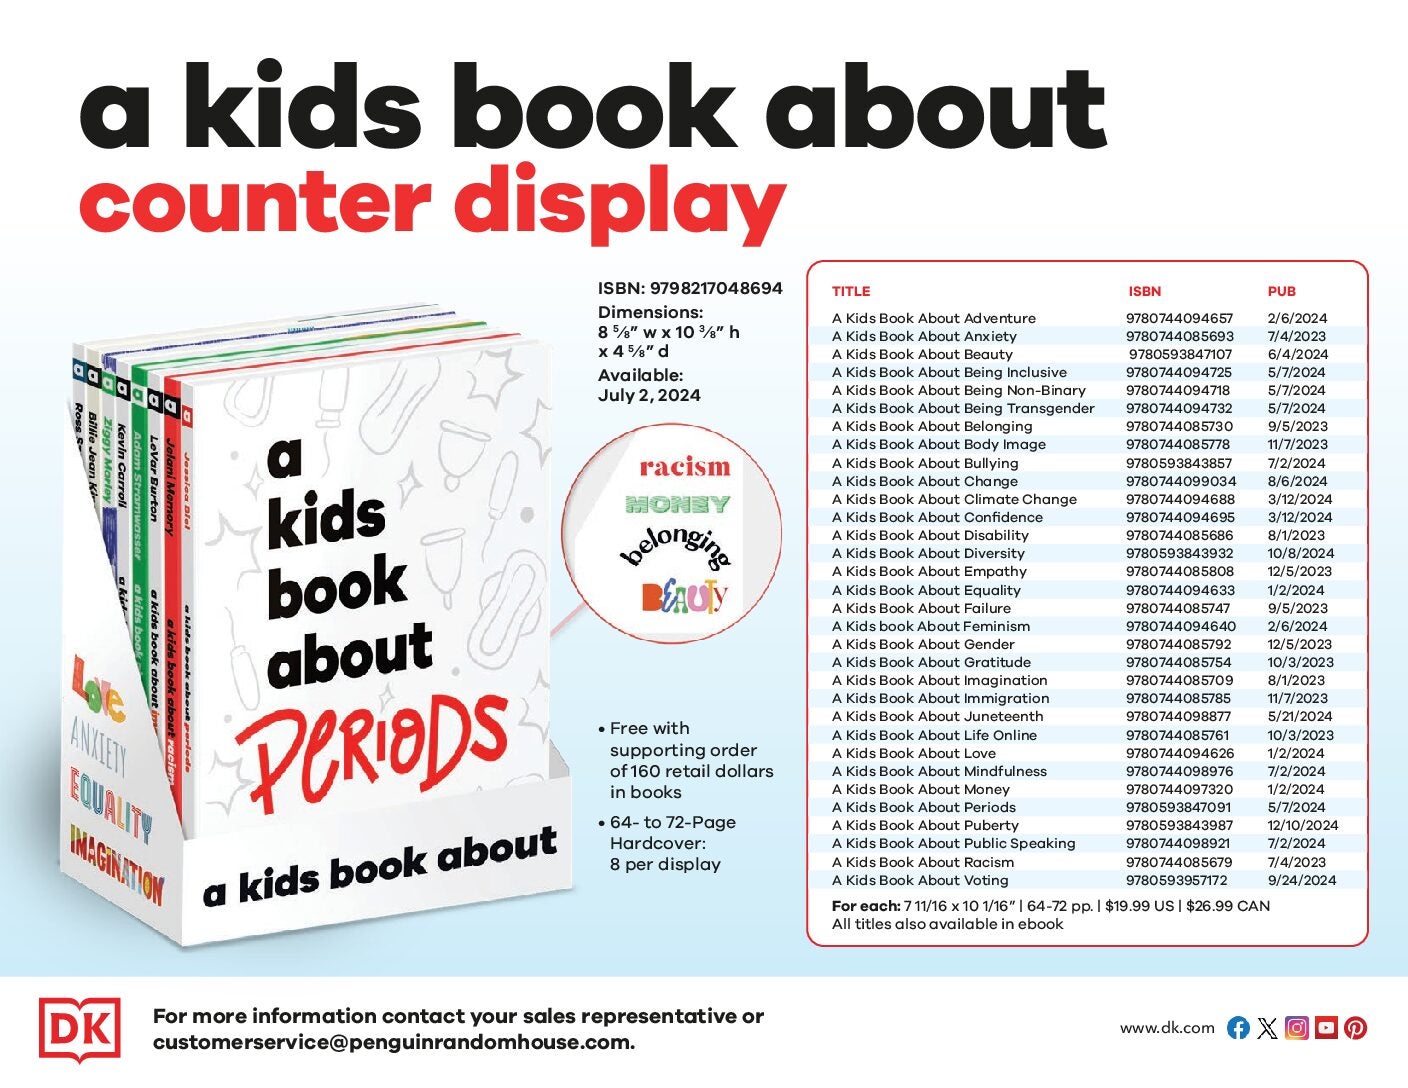 A Kids Book About Counter Display cover